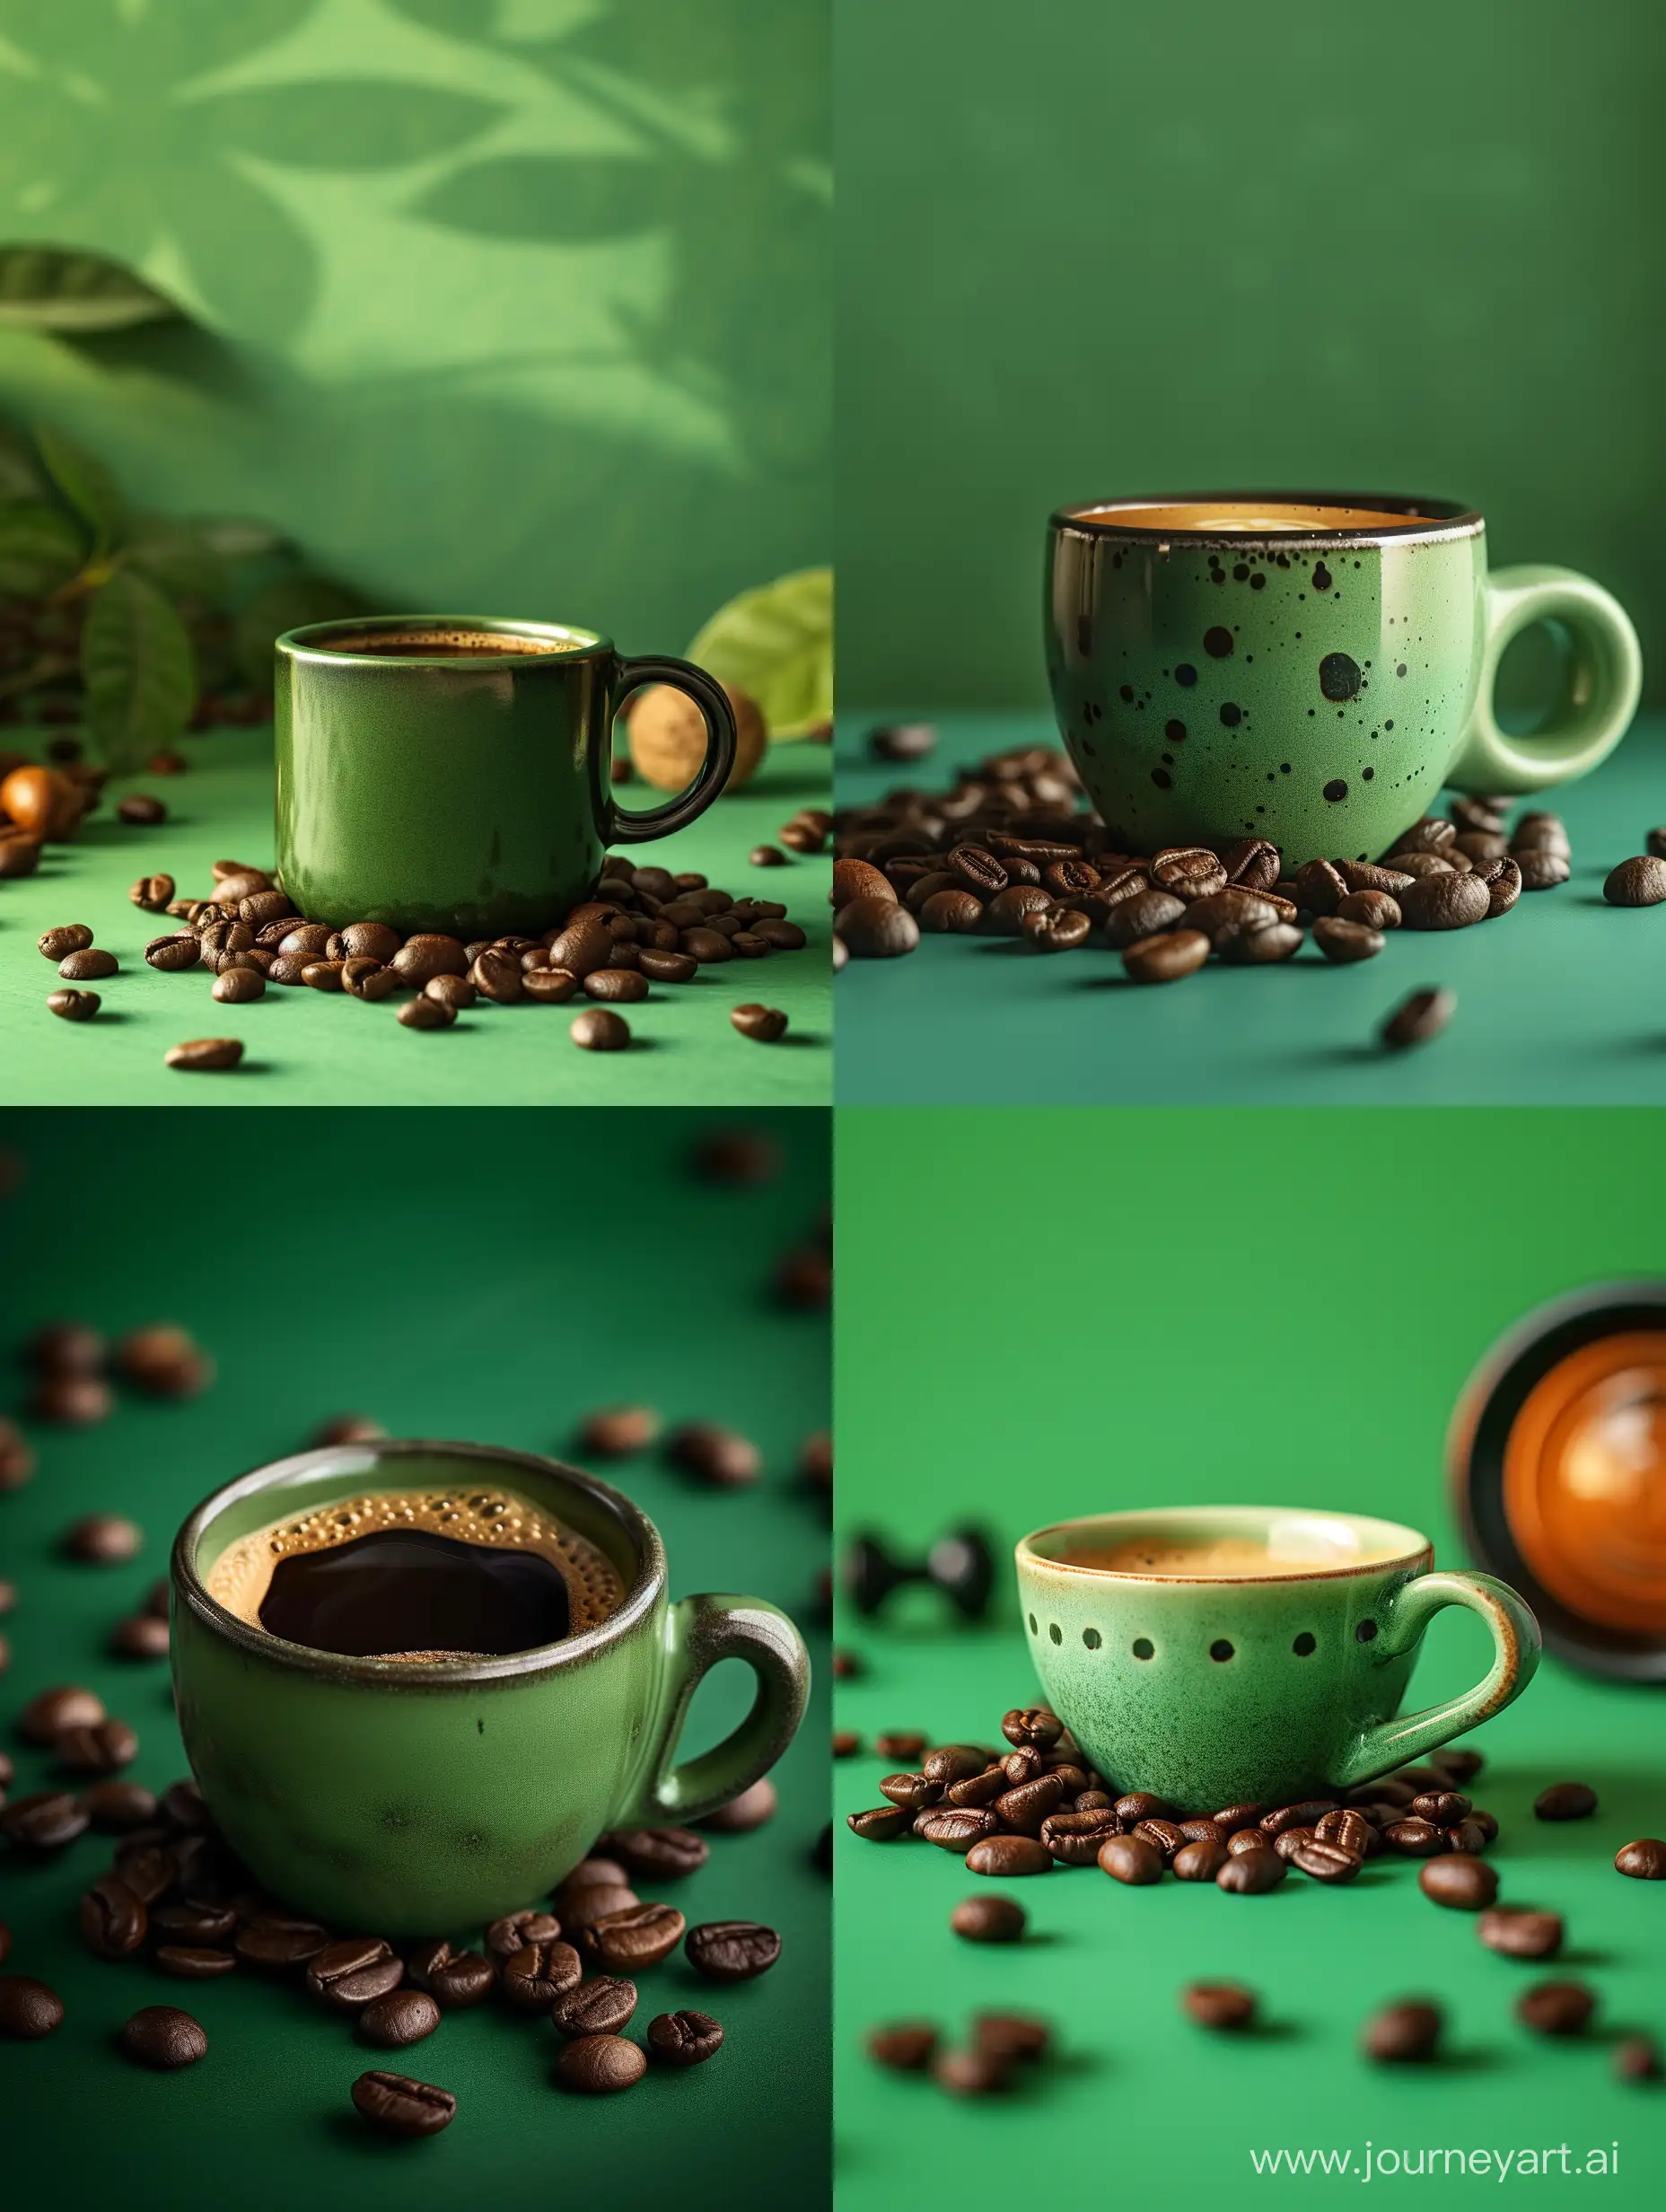 Aromatic-Coffee-Cup-with-Beans-on-Green-Background-Studio-Shot